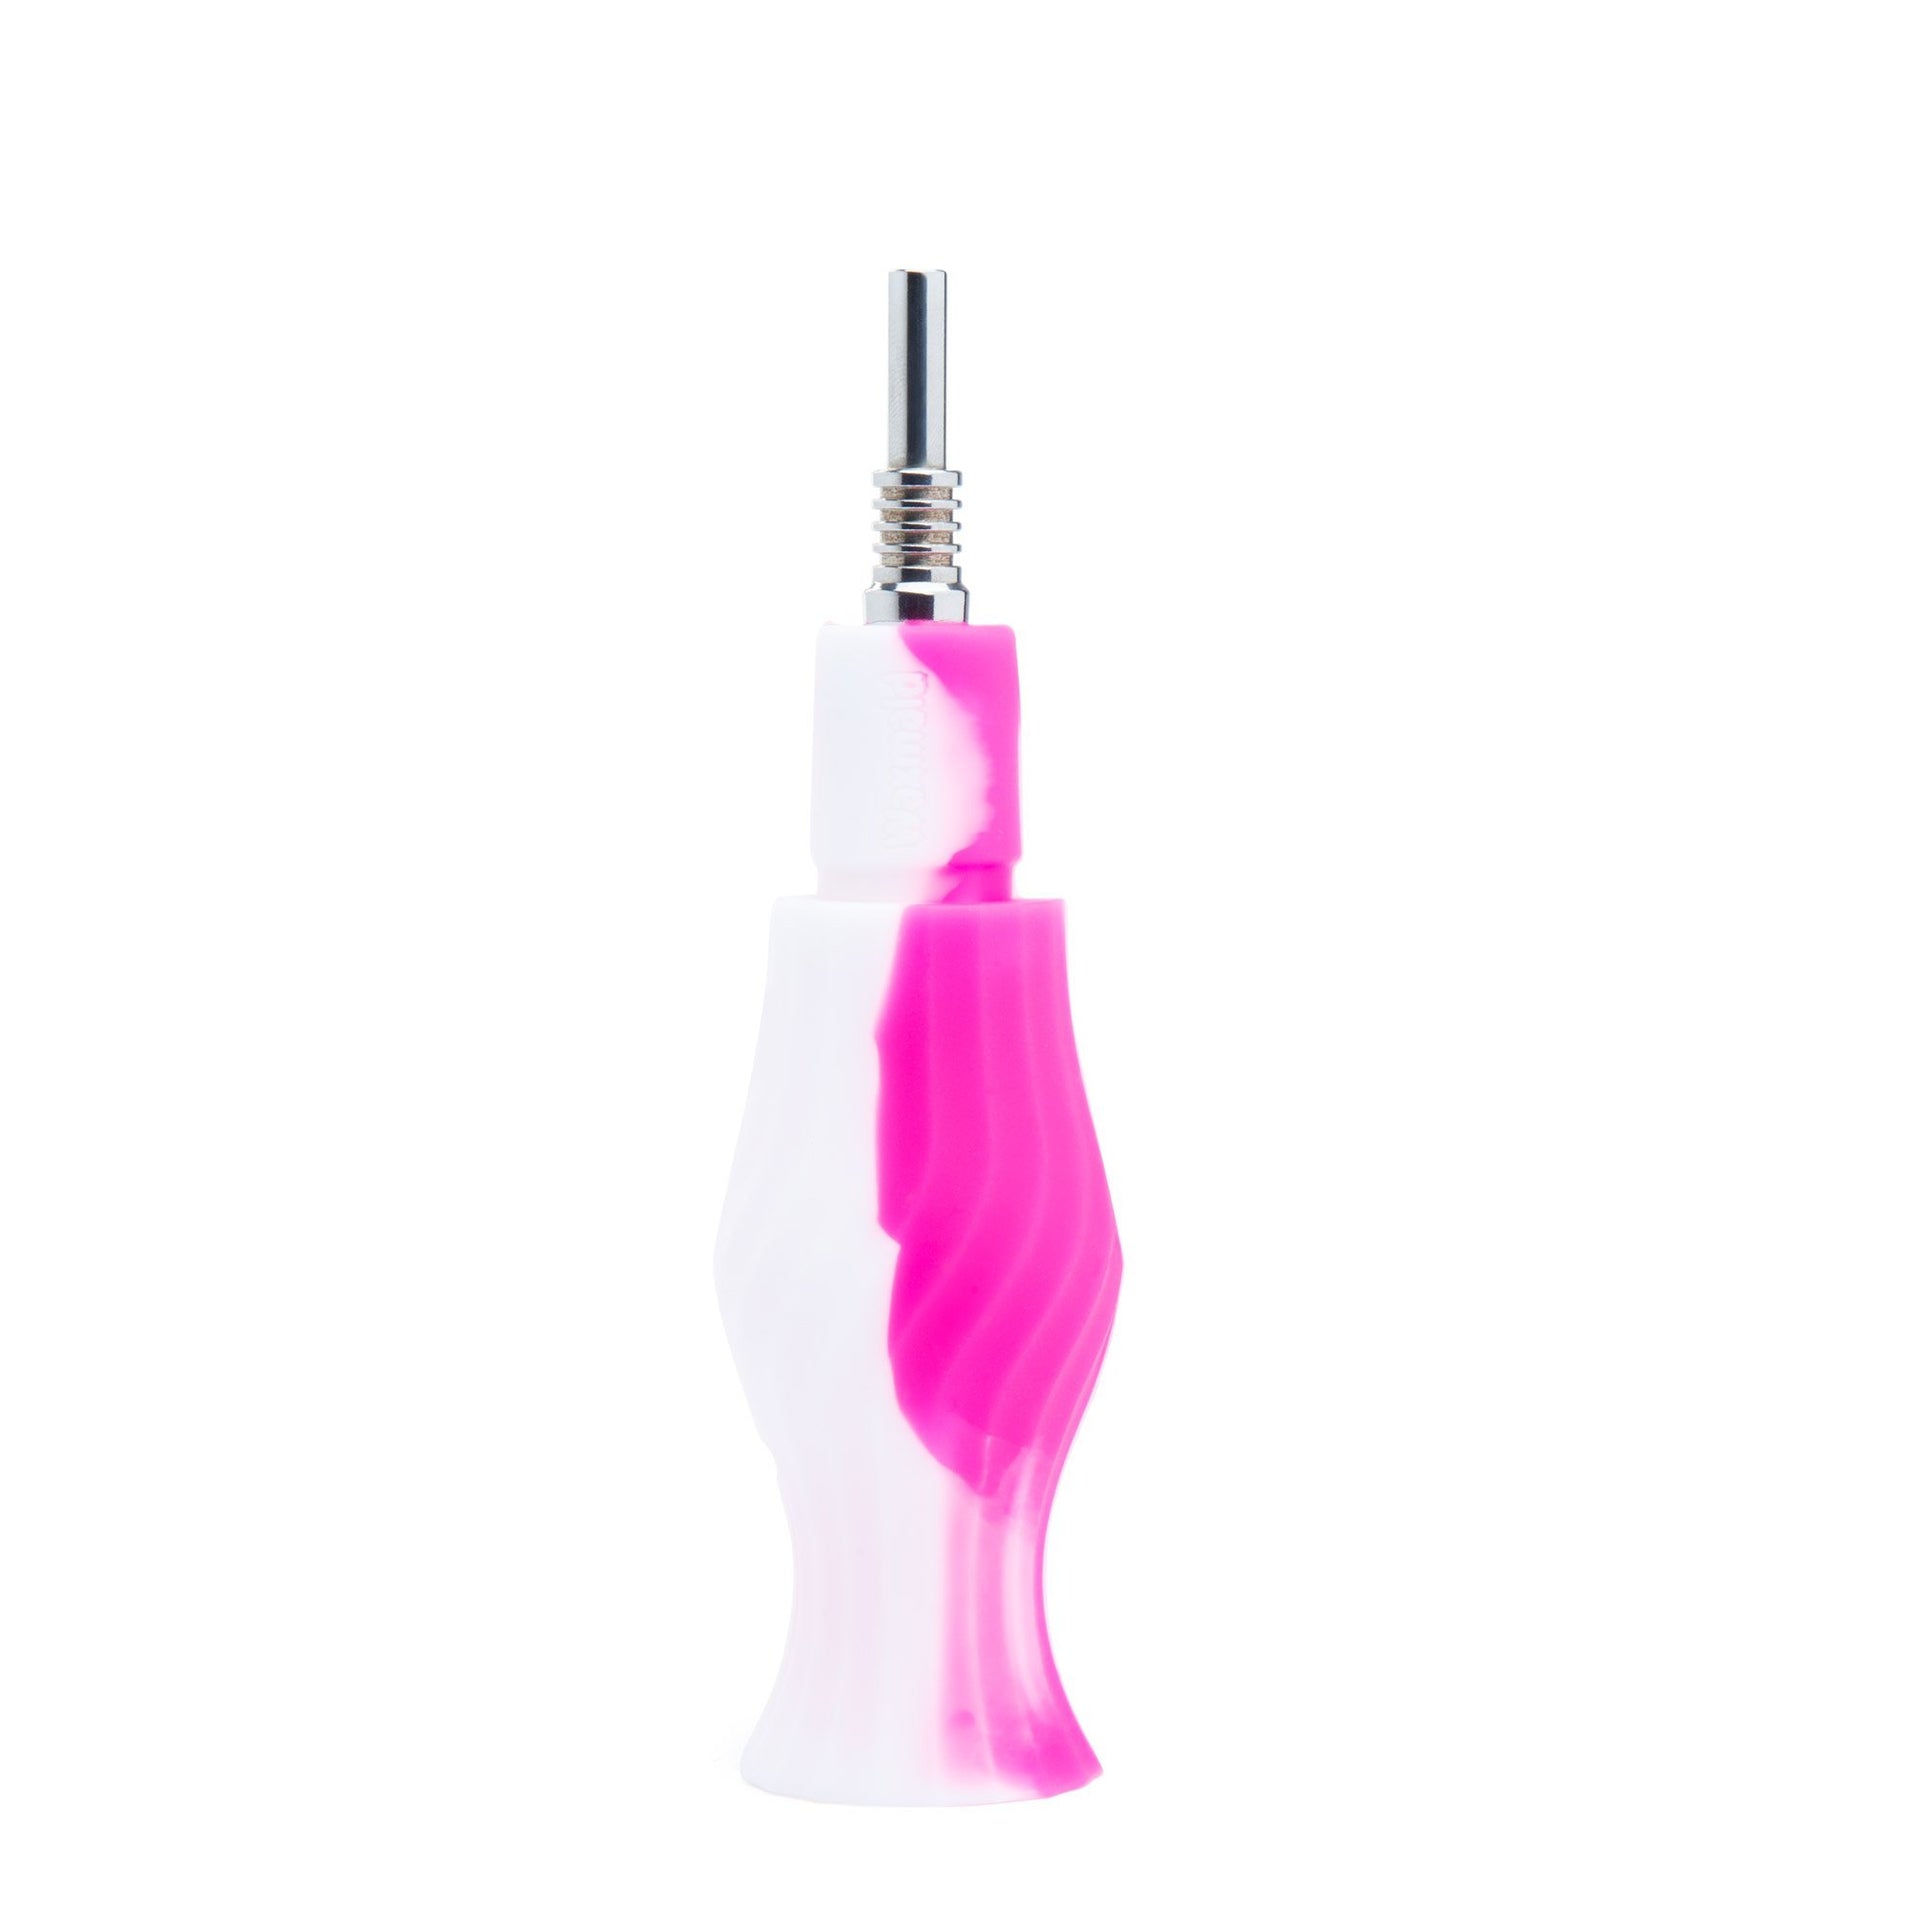 8 Capsule Silicone Glass Nectar Collector from Waxmaid